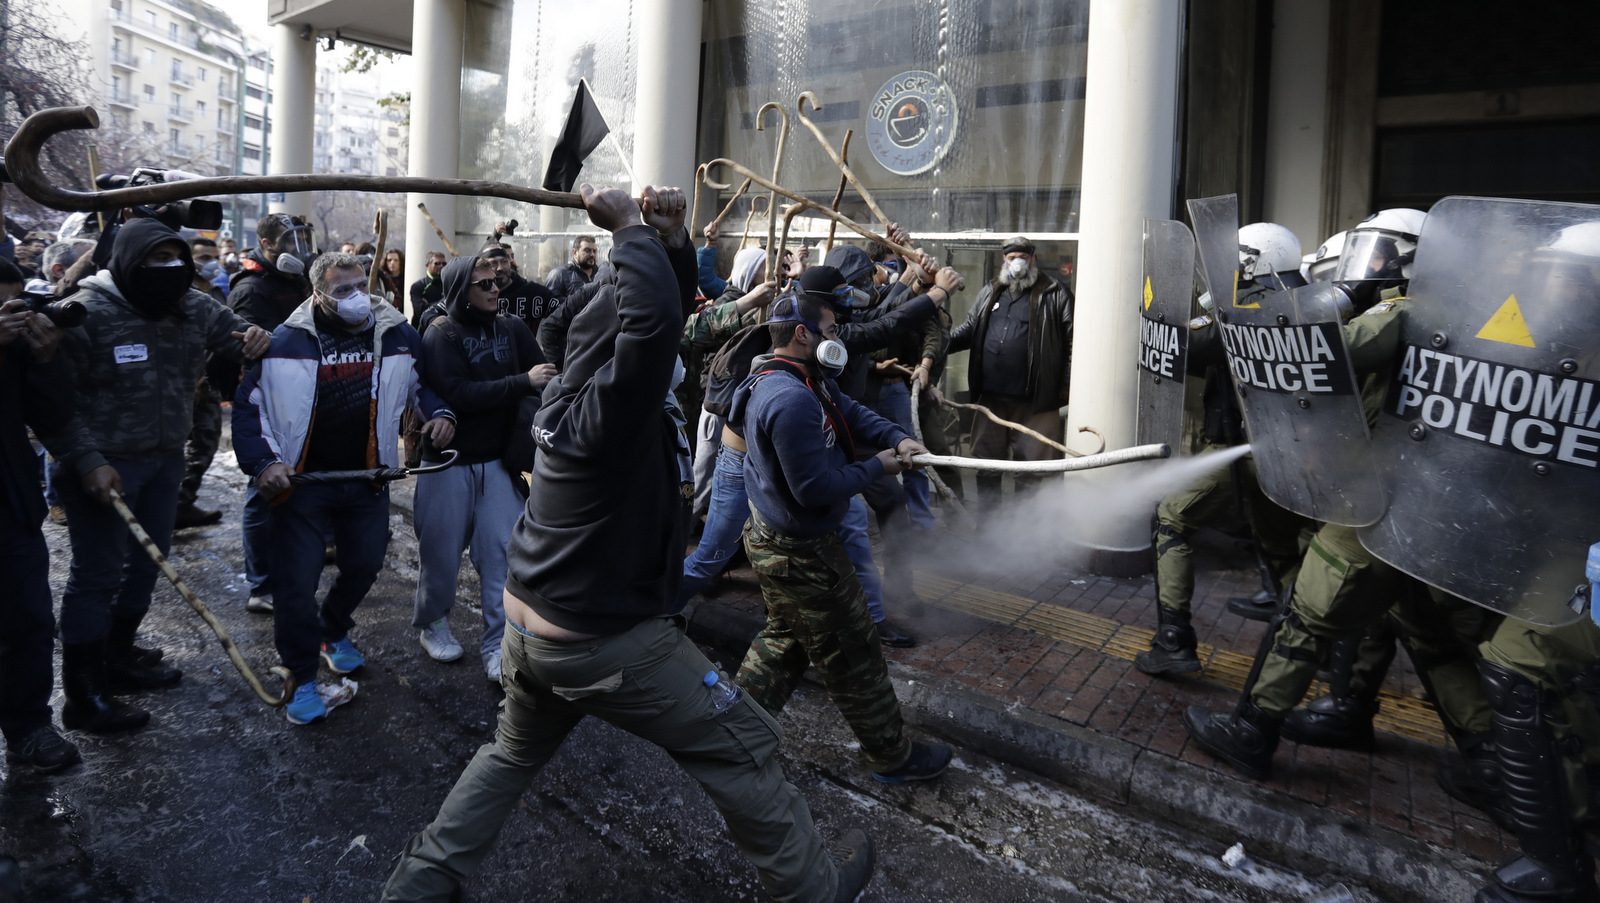 Riot police clashes with protesting farmers outside the greek Agriculture Ministry, in Athens, Wednesday, March 8, 2017. Police fired tear gas to prevent farmers from forcing their way into the ministry building, while protesters responded by throwing stones. No injuries or arrests were reported. Protesters are angry at increases in their tax and social security contributions, part of the income and spending cuts Greece's left-led government has implemented to meet bailout creditor-demanded budget targets.(AP/Thanassis Stavrakis)